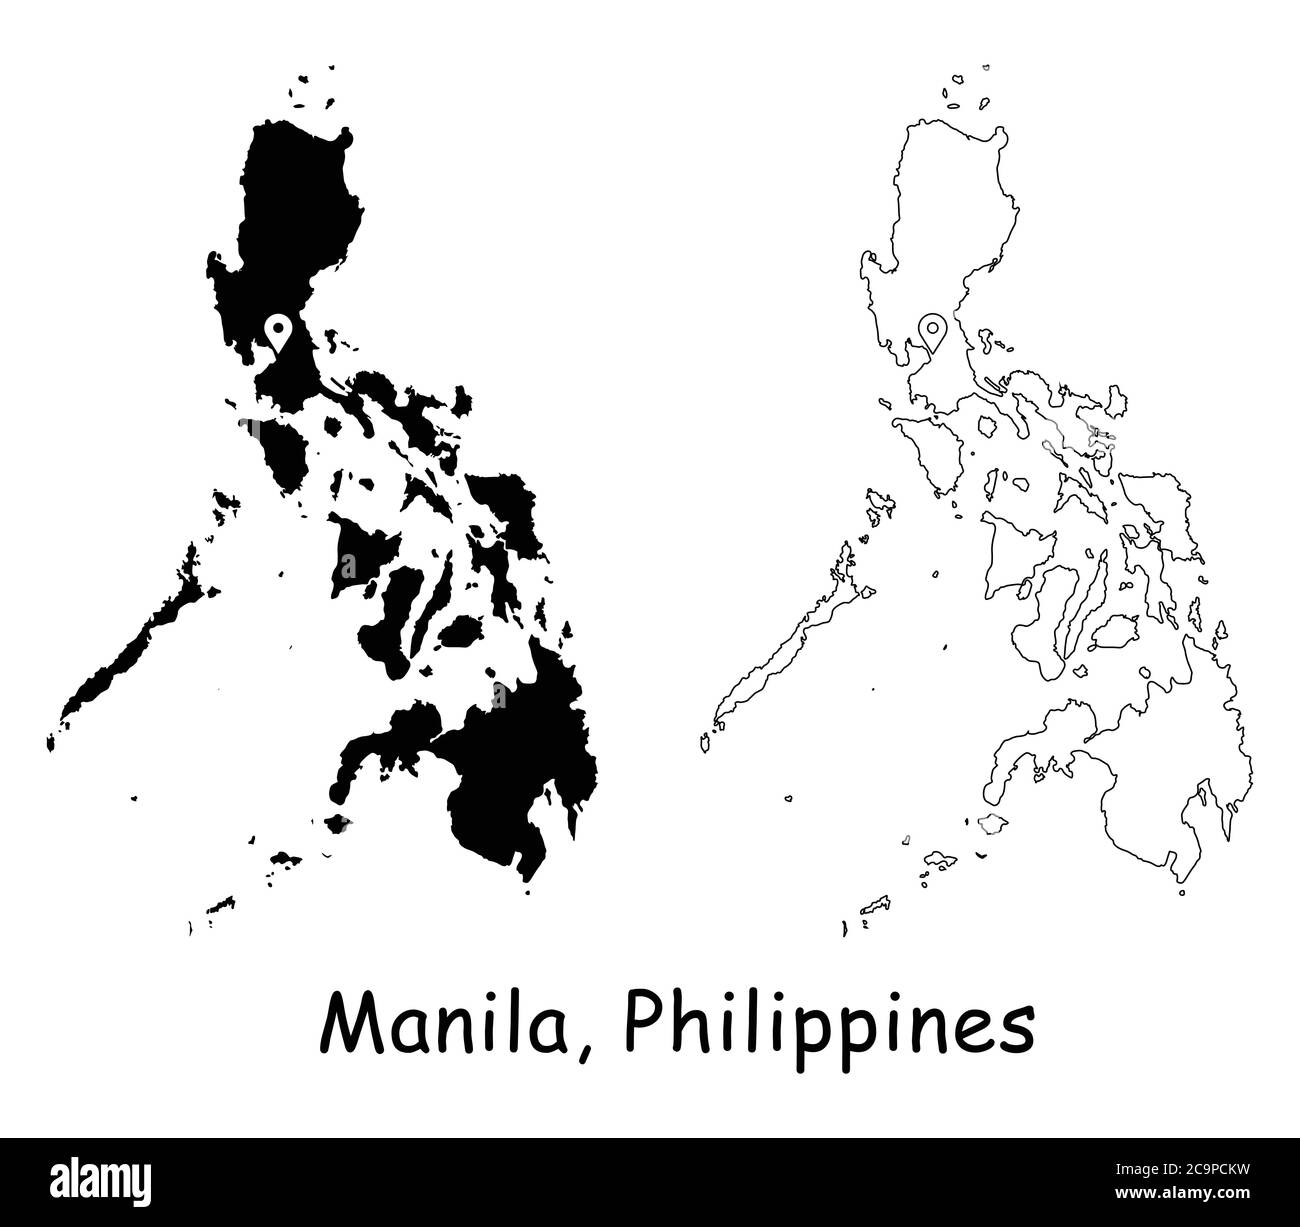 Manila, Philippines. Detailed Country Map with Location Pin on Capital City. Black silhouette and outline maps isolated on white background. EPS Vecto Stock Vector